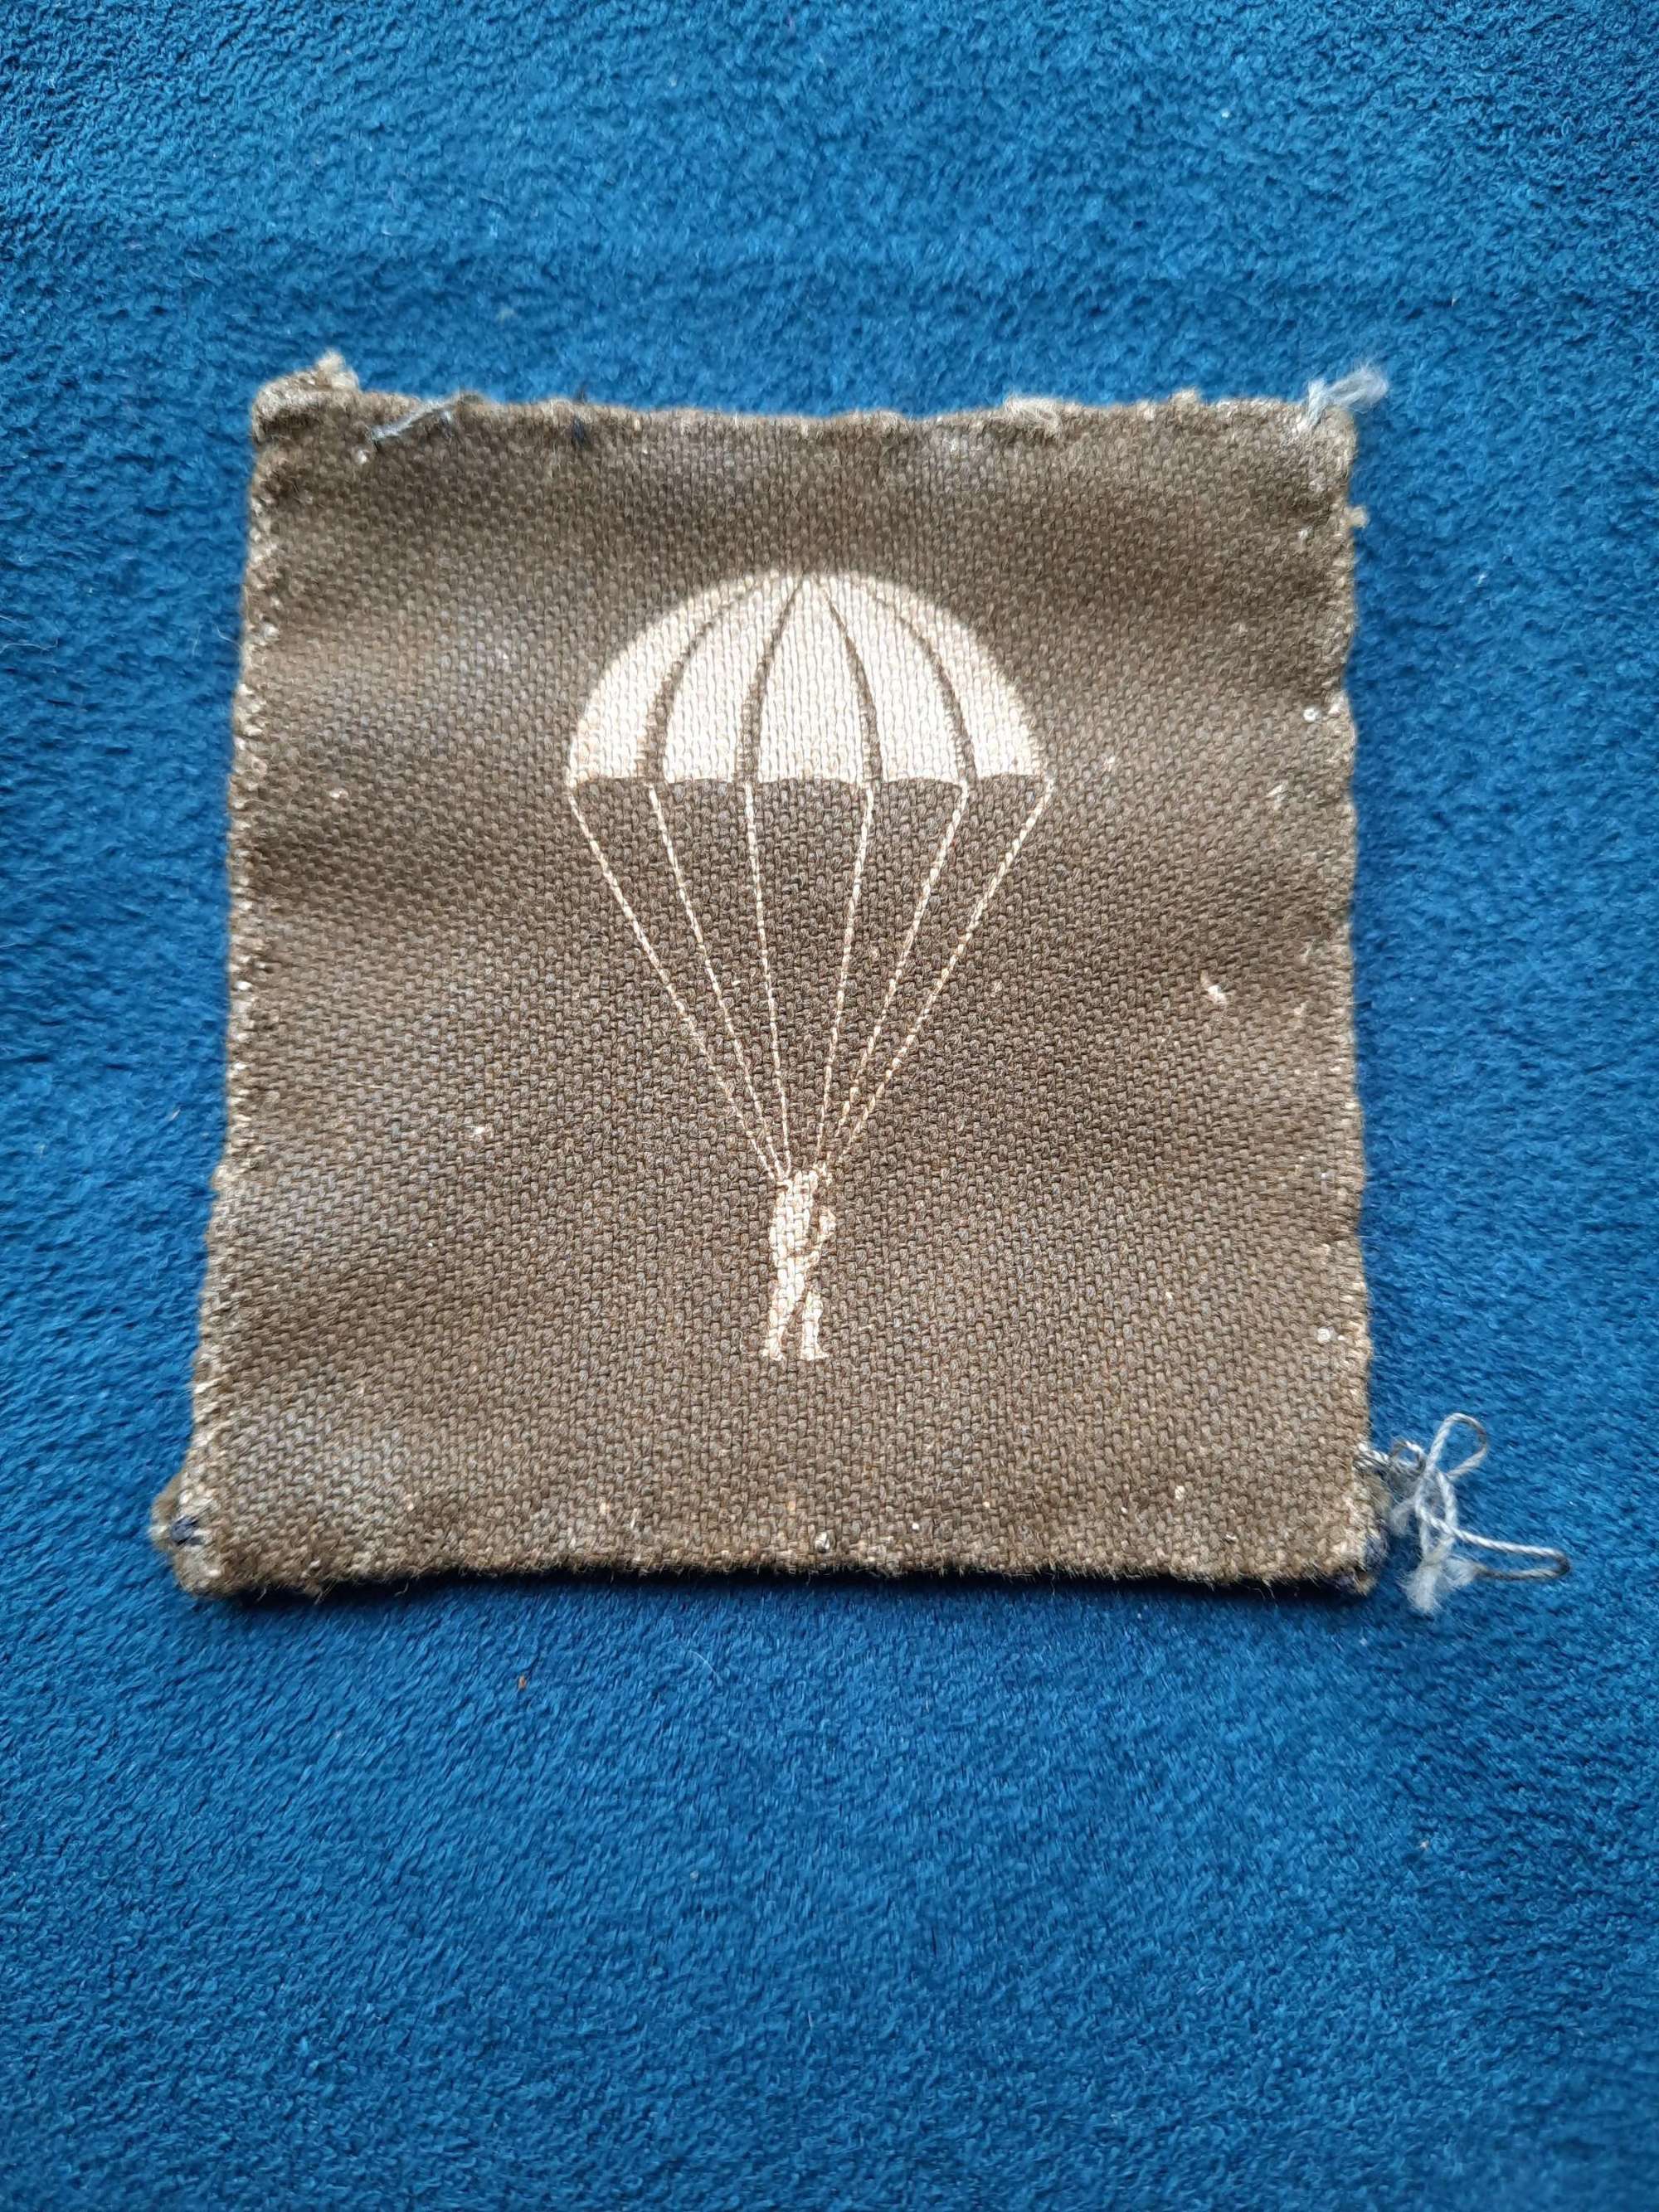 WW2 Parachute Qualification Printed Patch